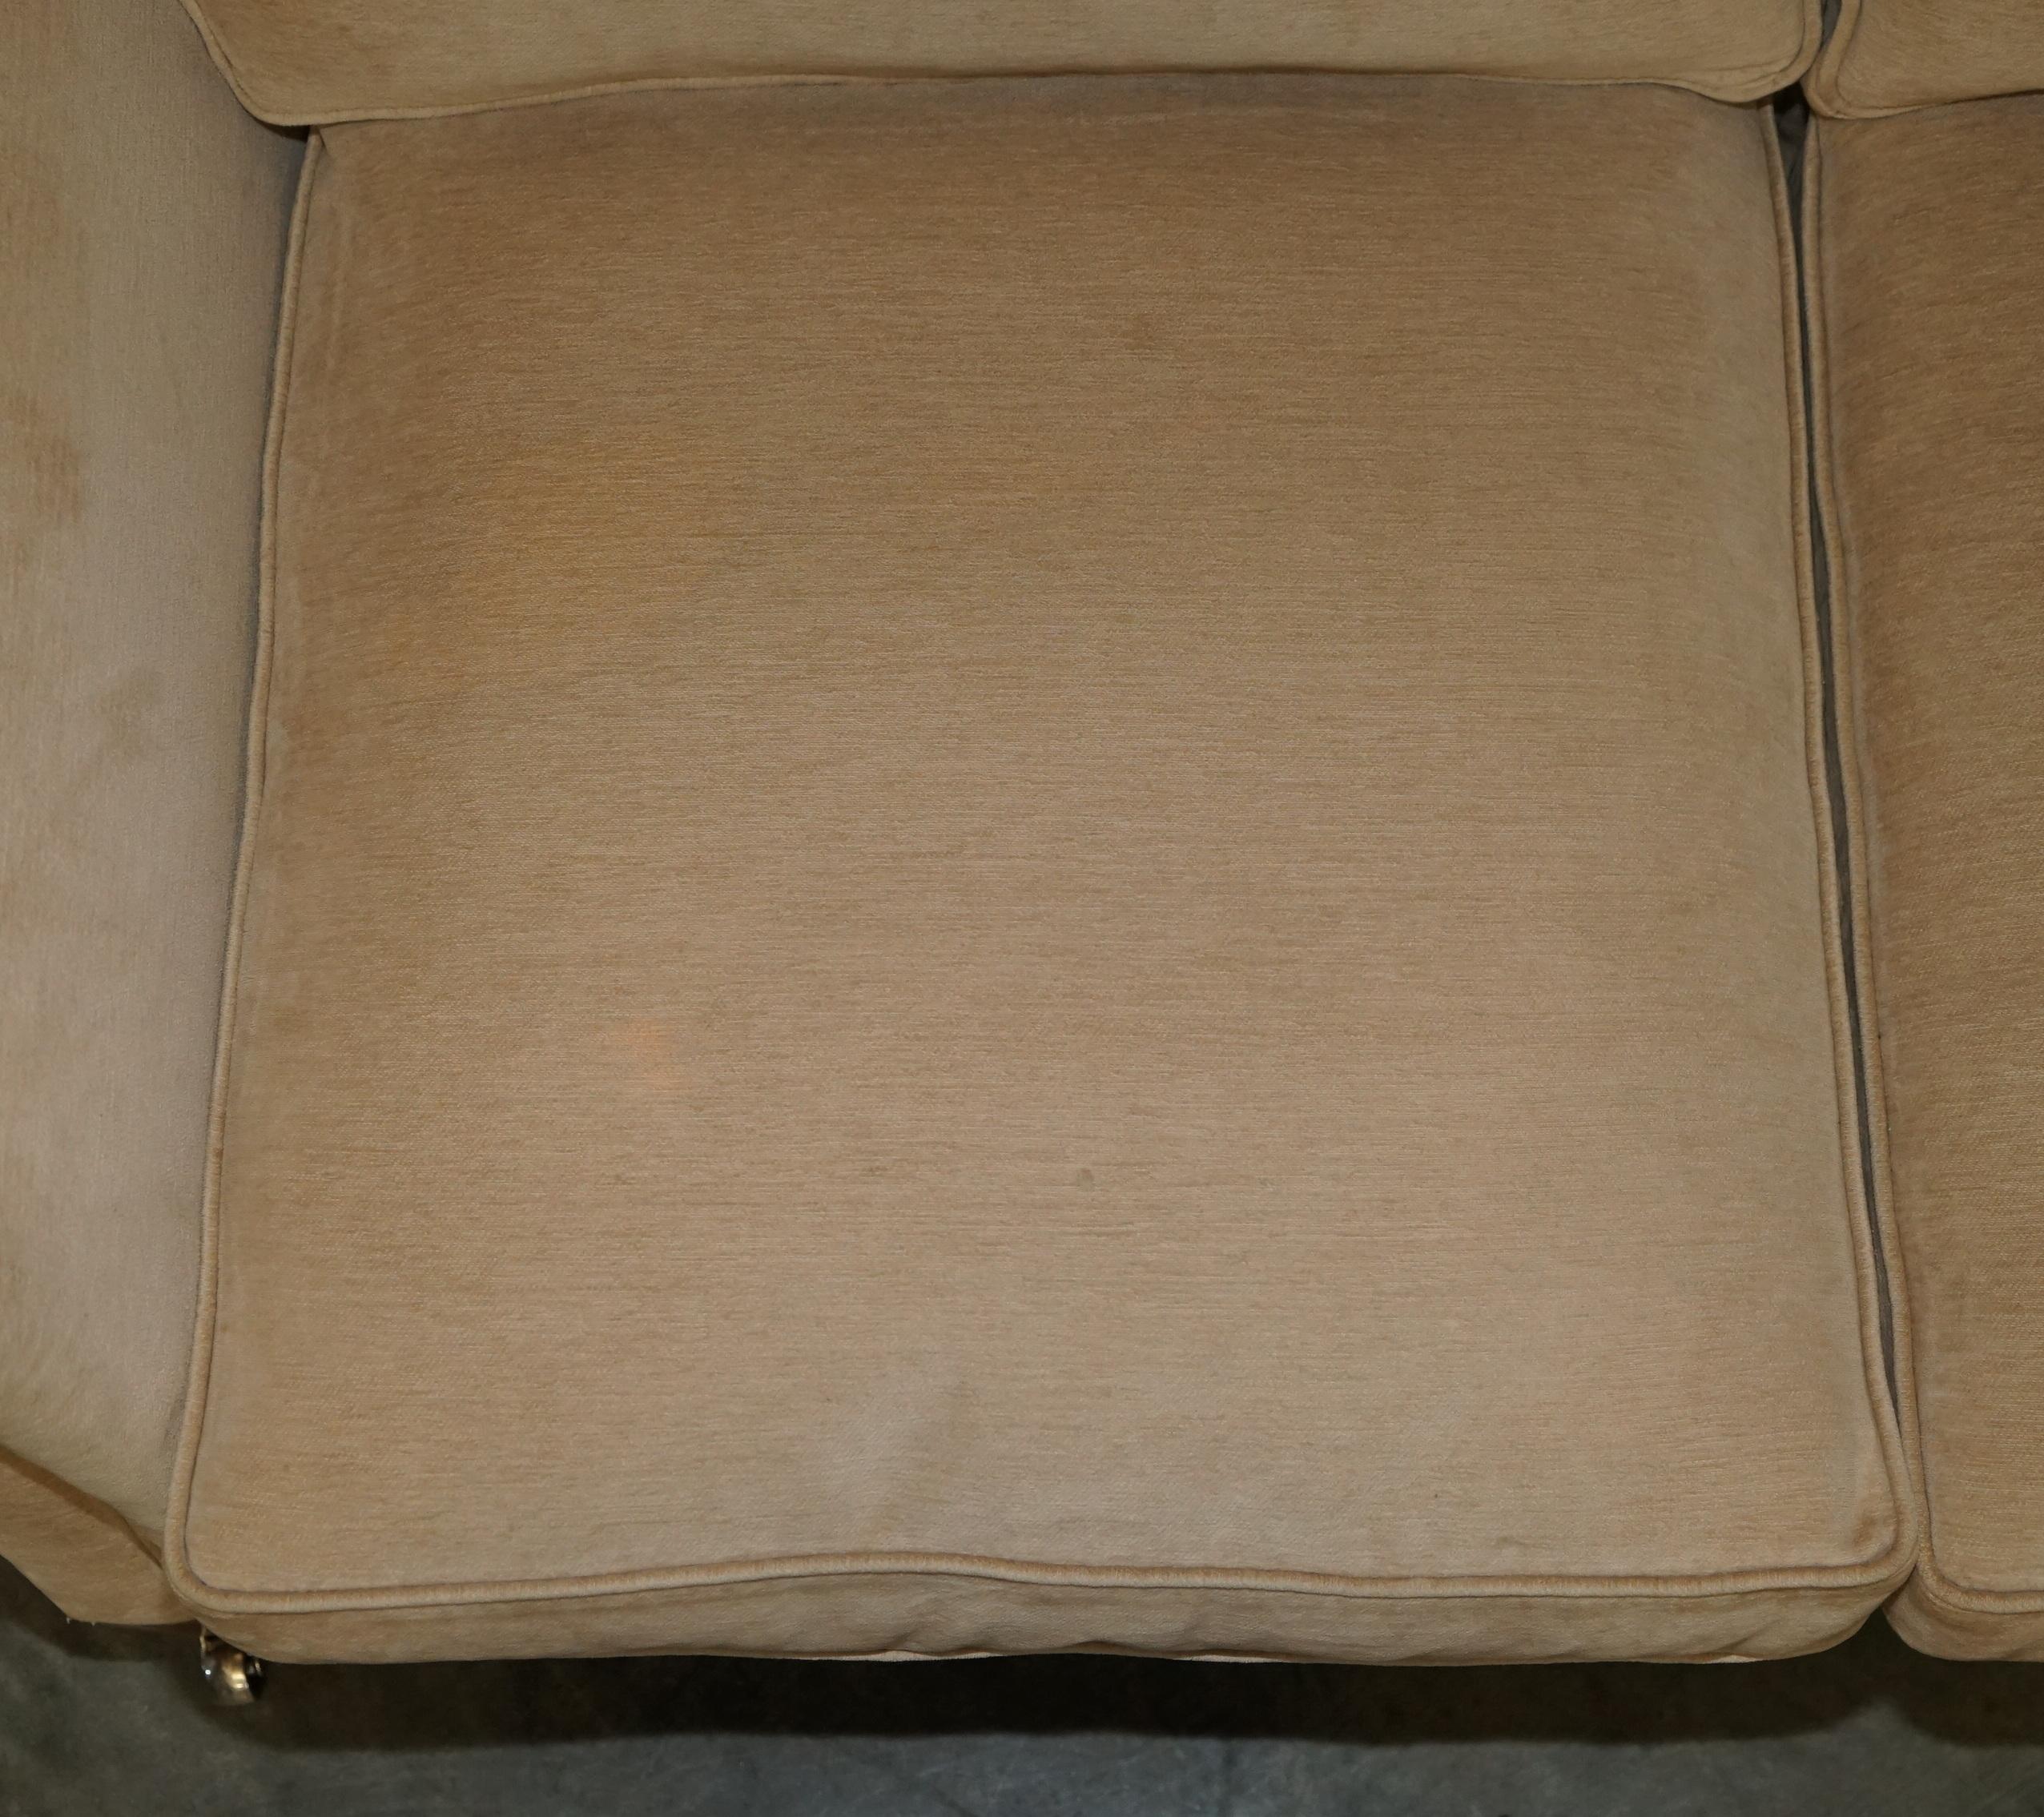 Upholstery EXQUISITE VISCOUNT DAVID LINLEY TWO SEAT SOFA WiTH STAMPED CASTORS For Sale